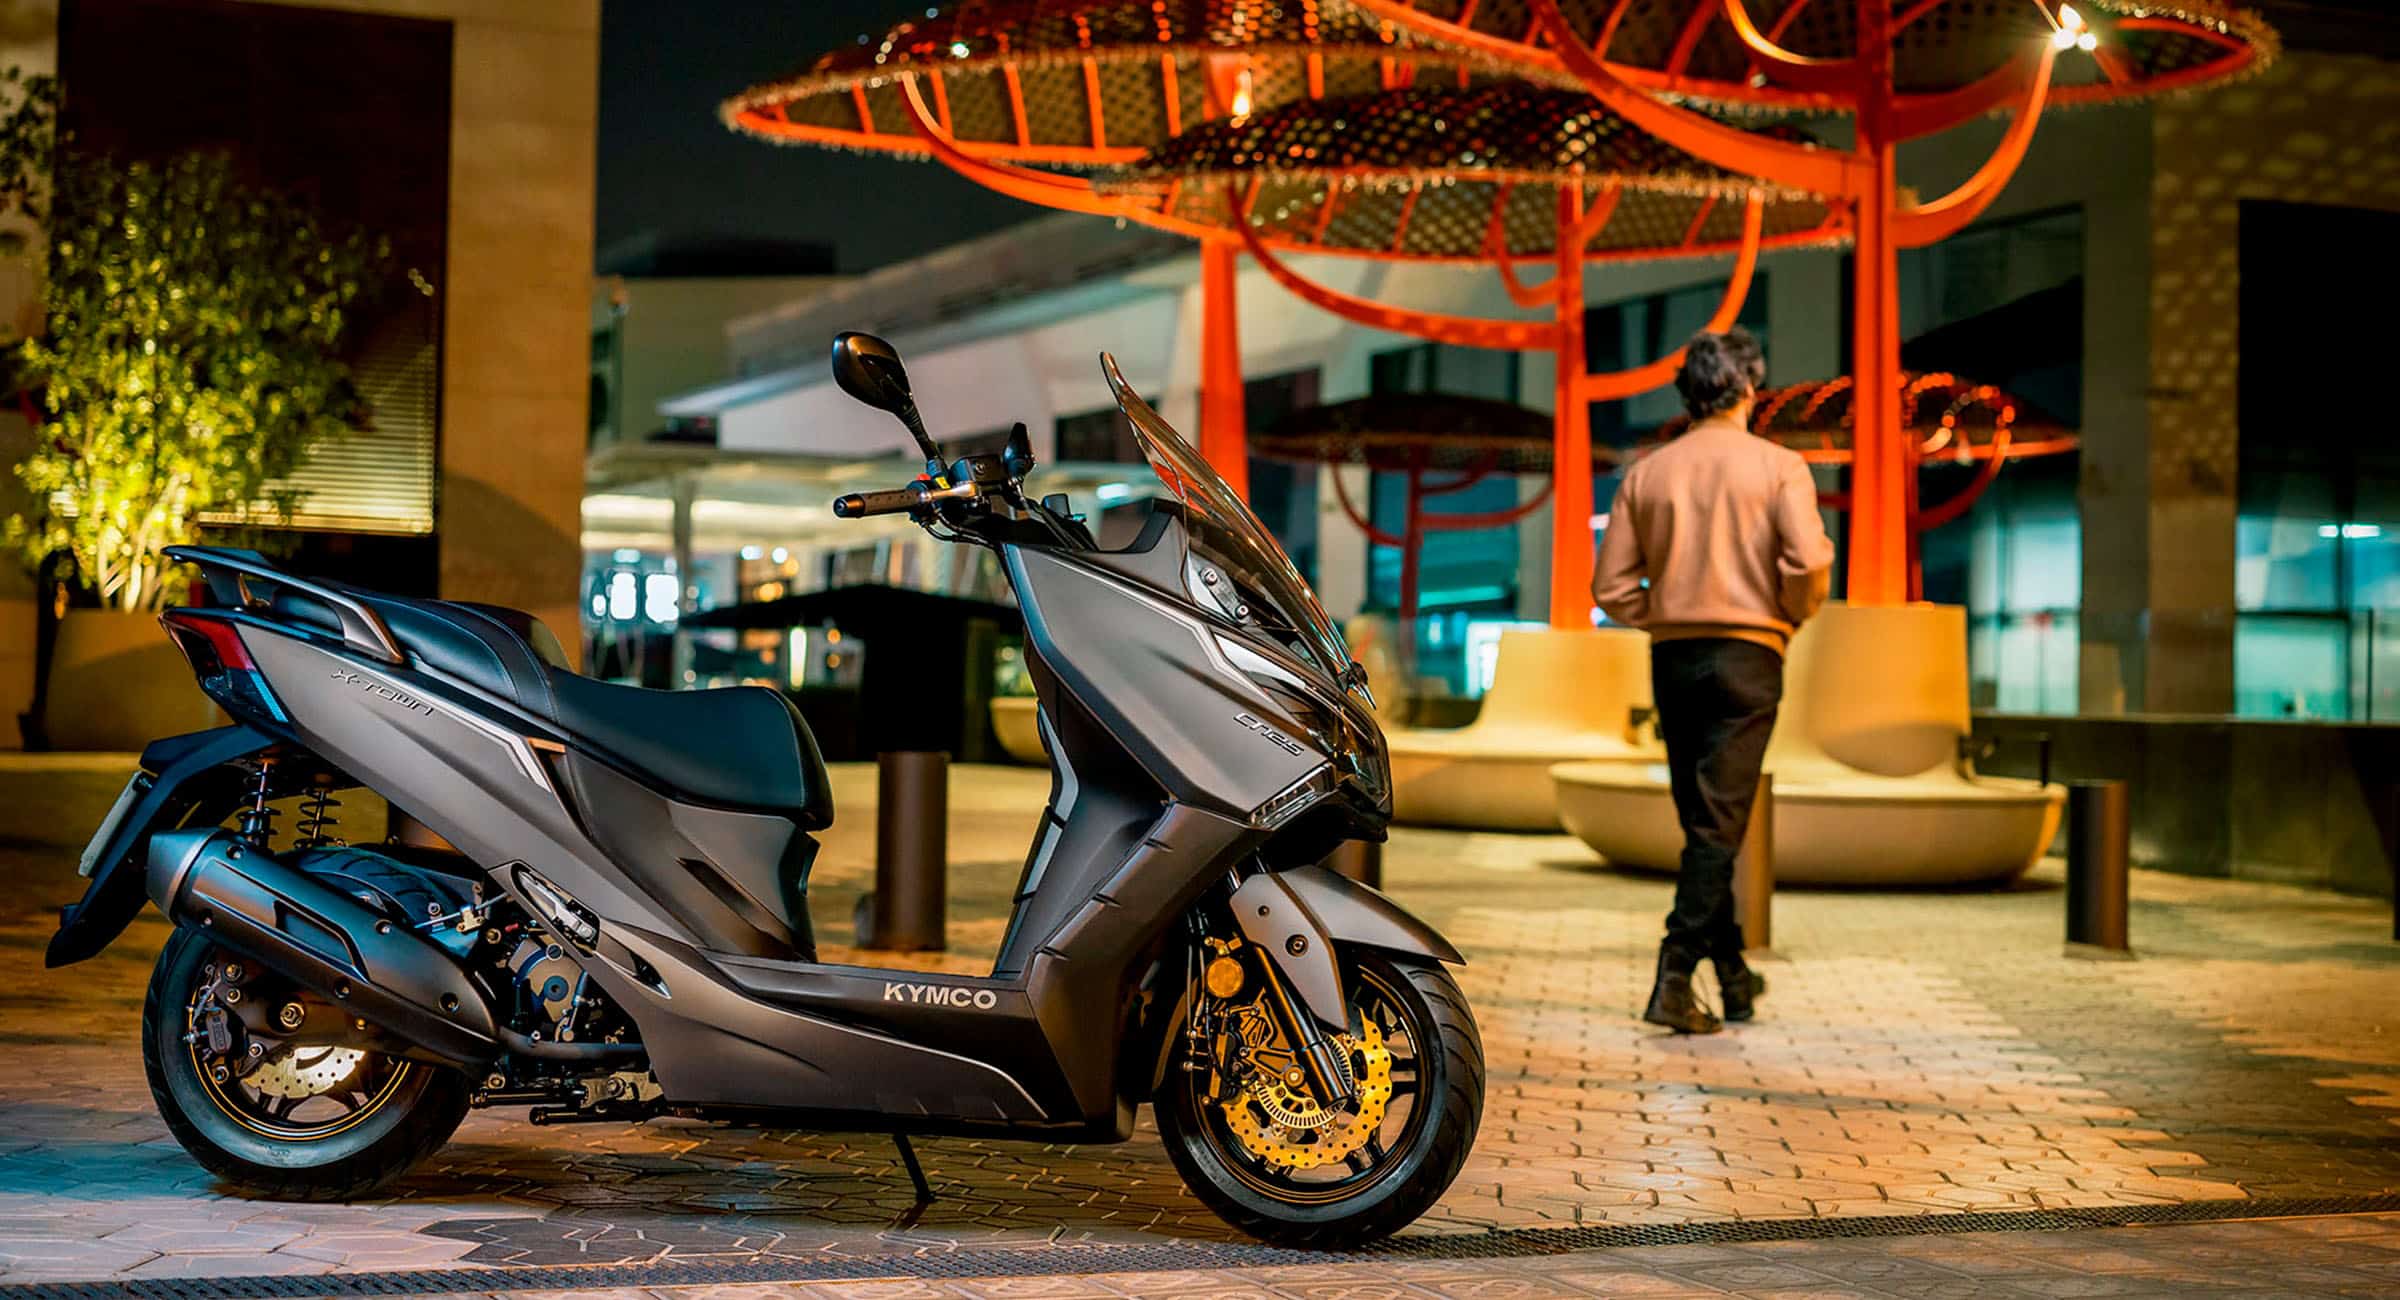 ddbikes_kymco_xtownct125-5